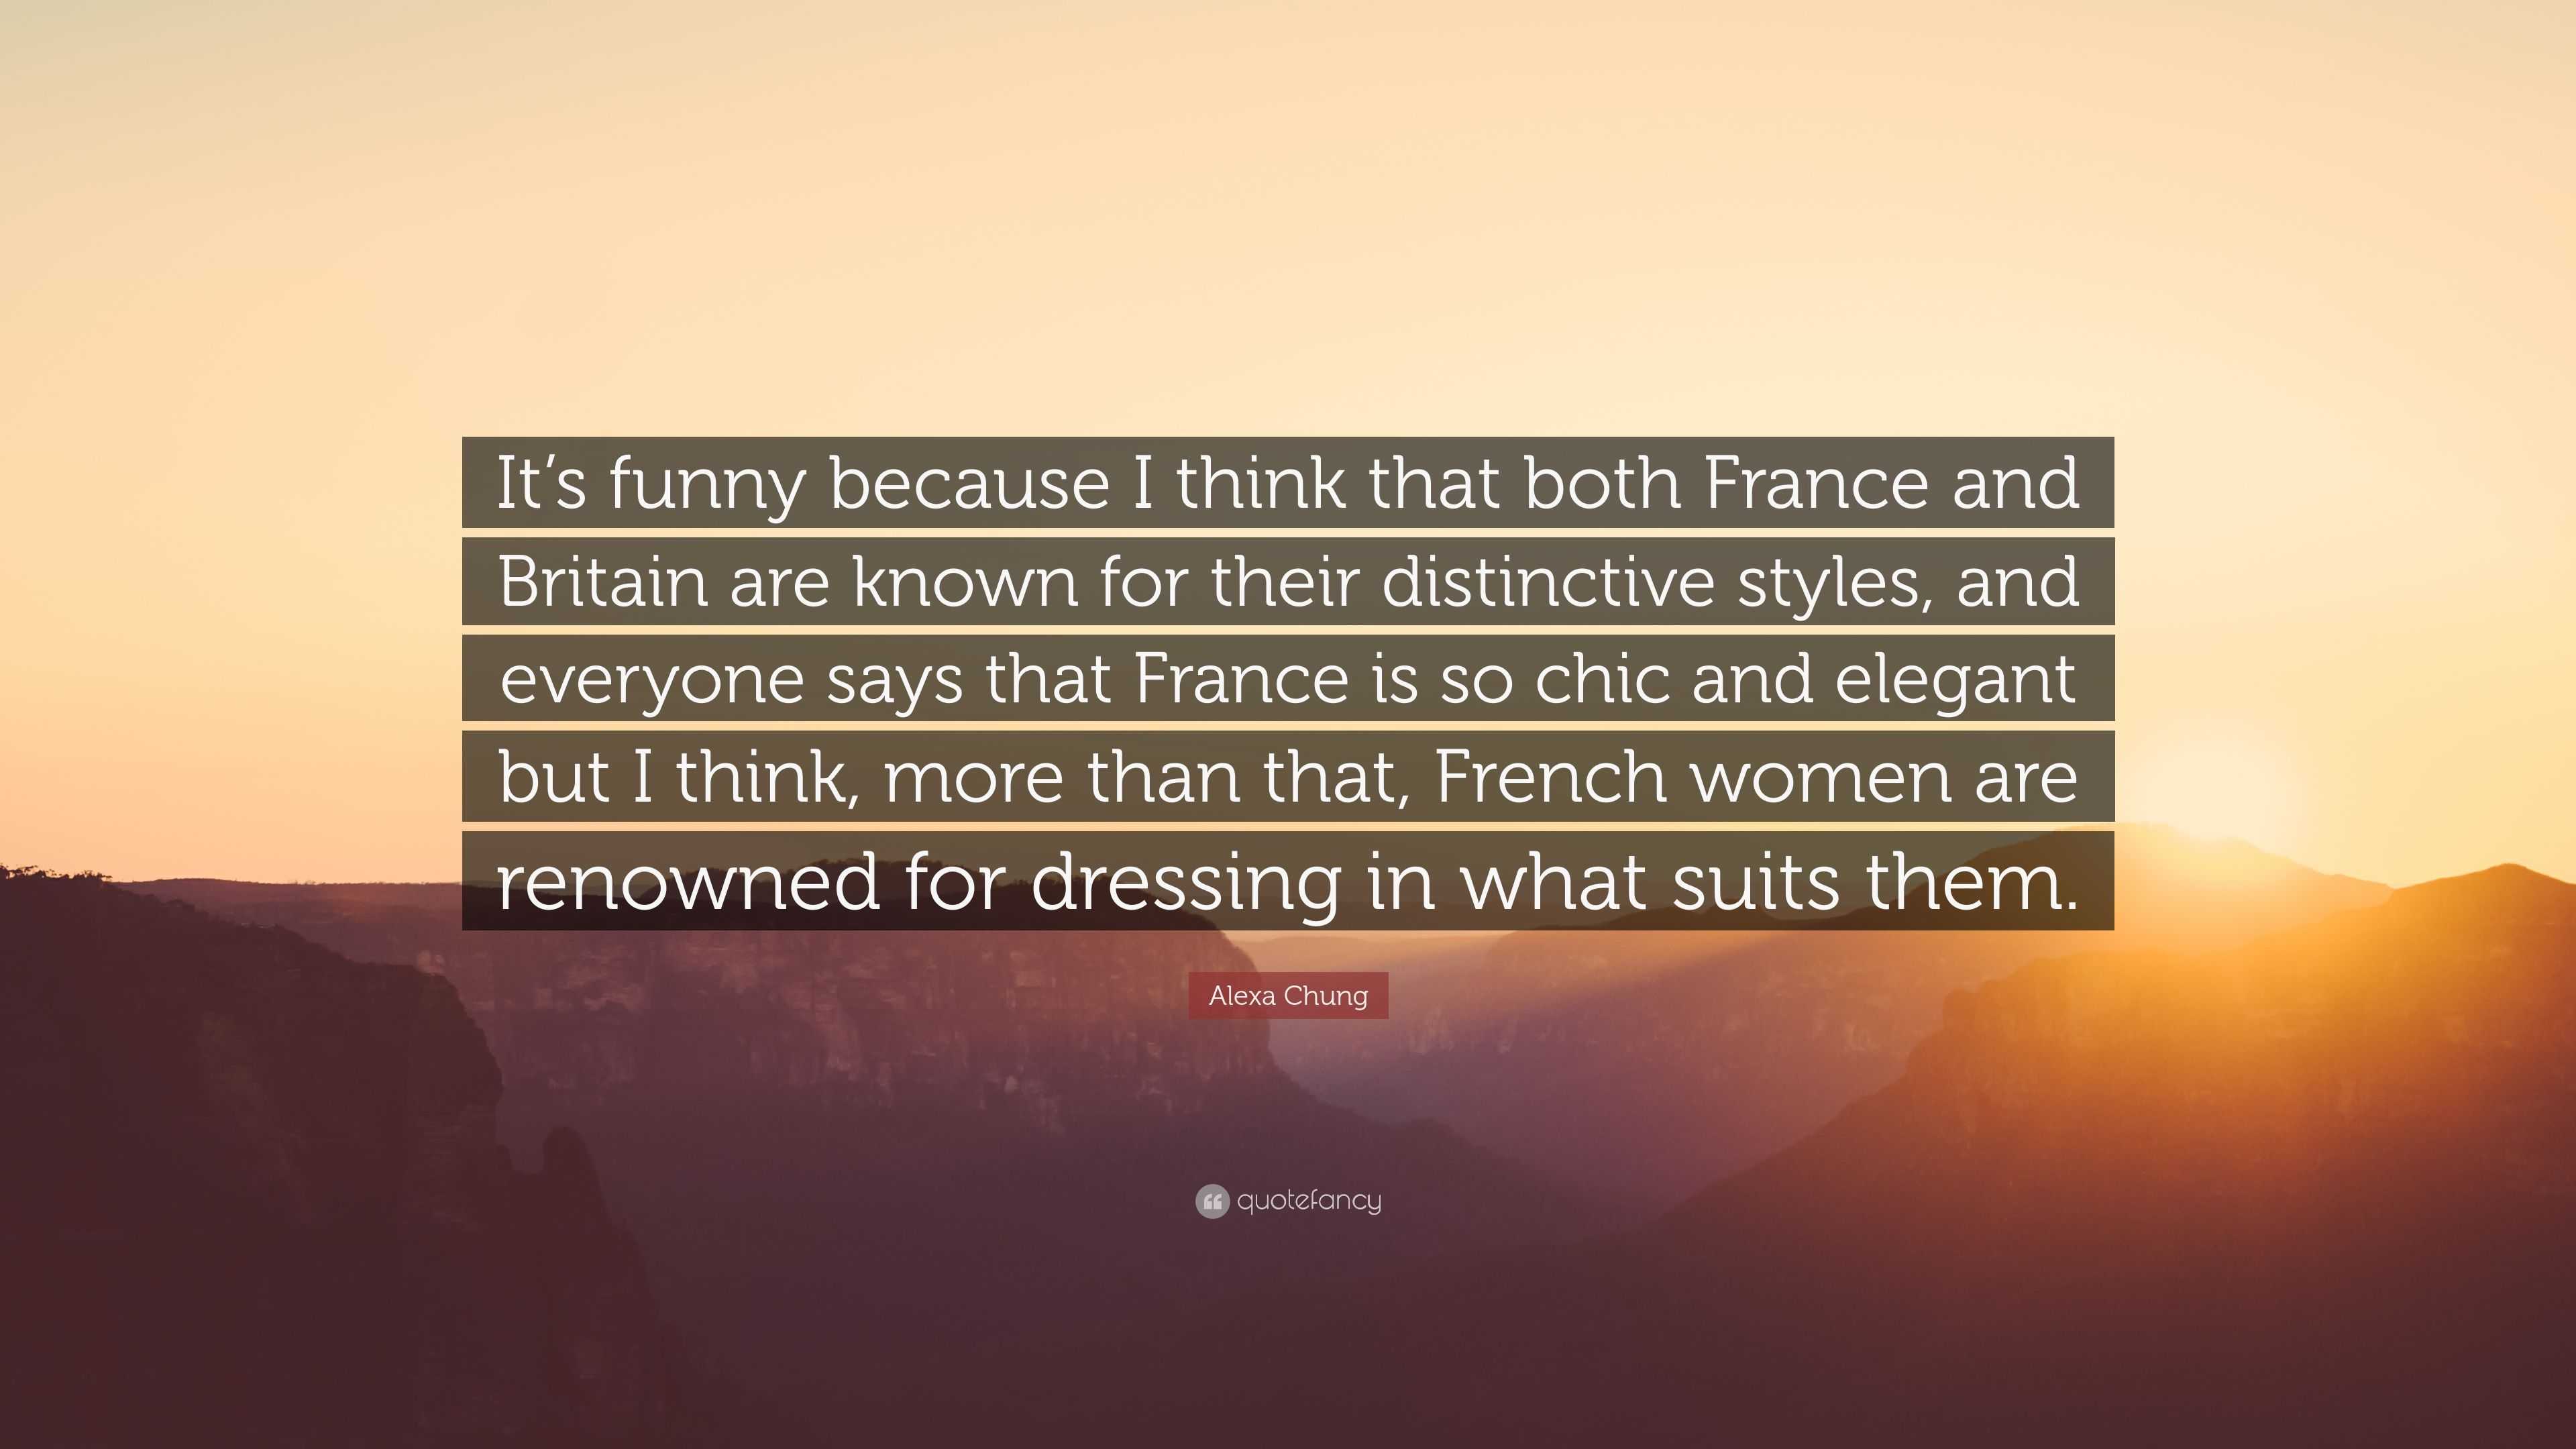 Alexa Chung Quote: “It's funny because I think that both France and Britain  are known for their distinctive styles, and everyone says that F...”